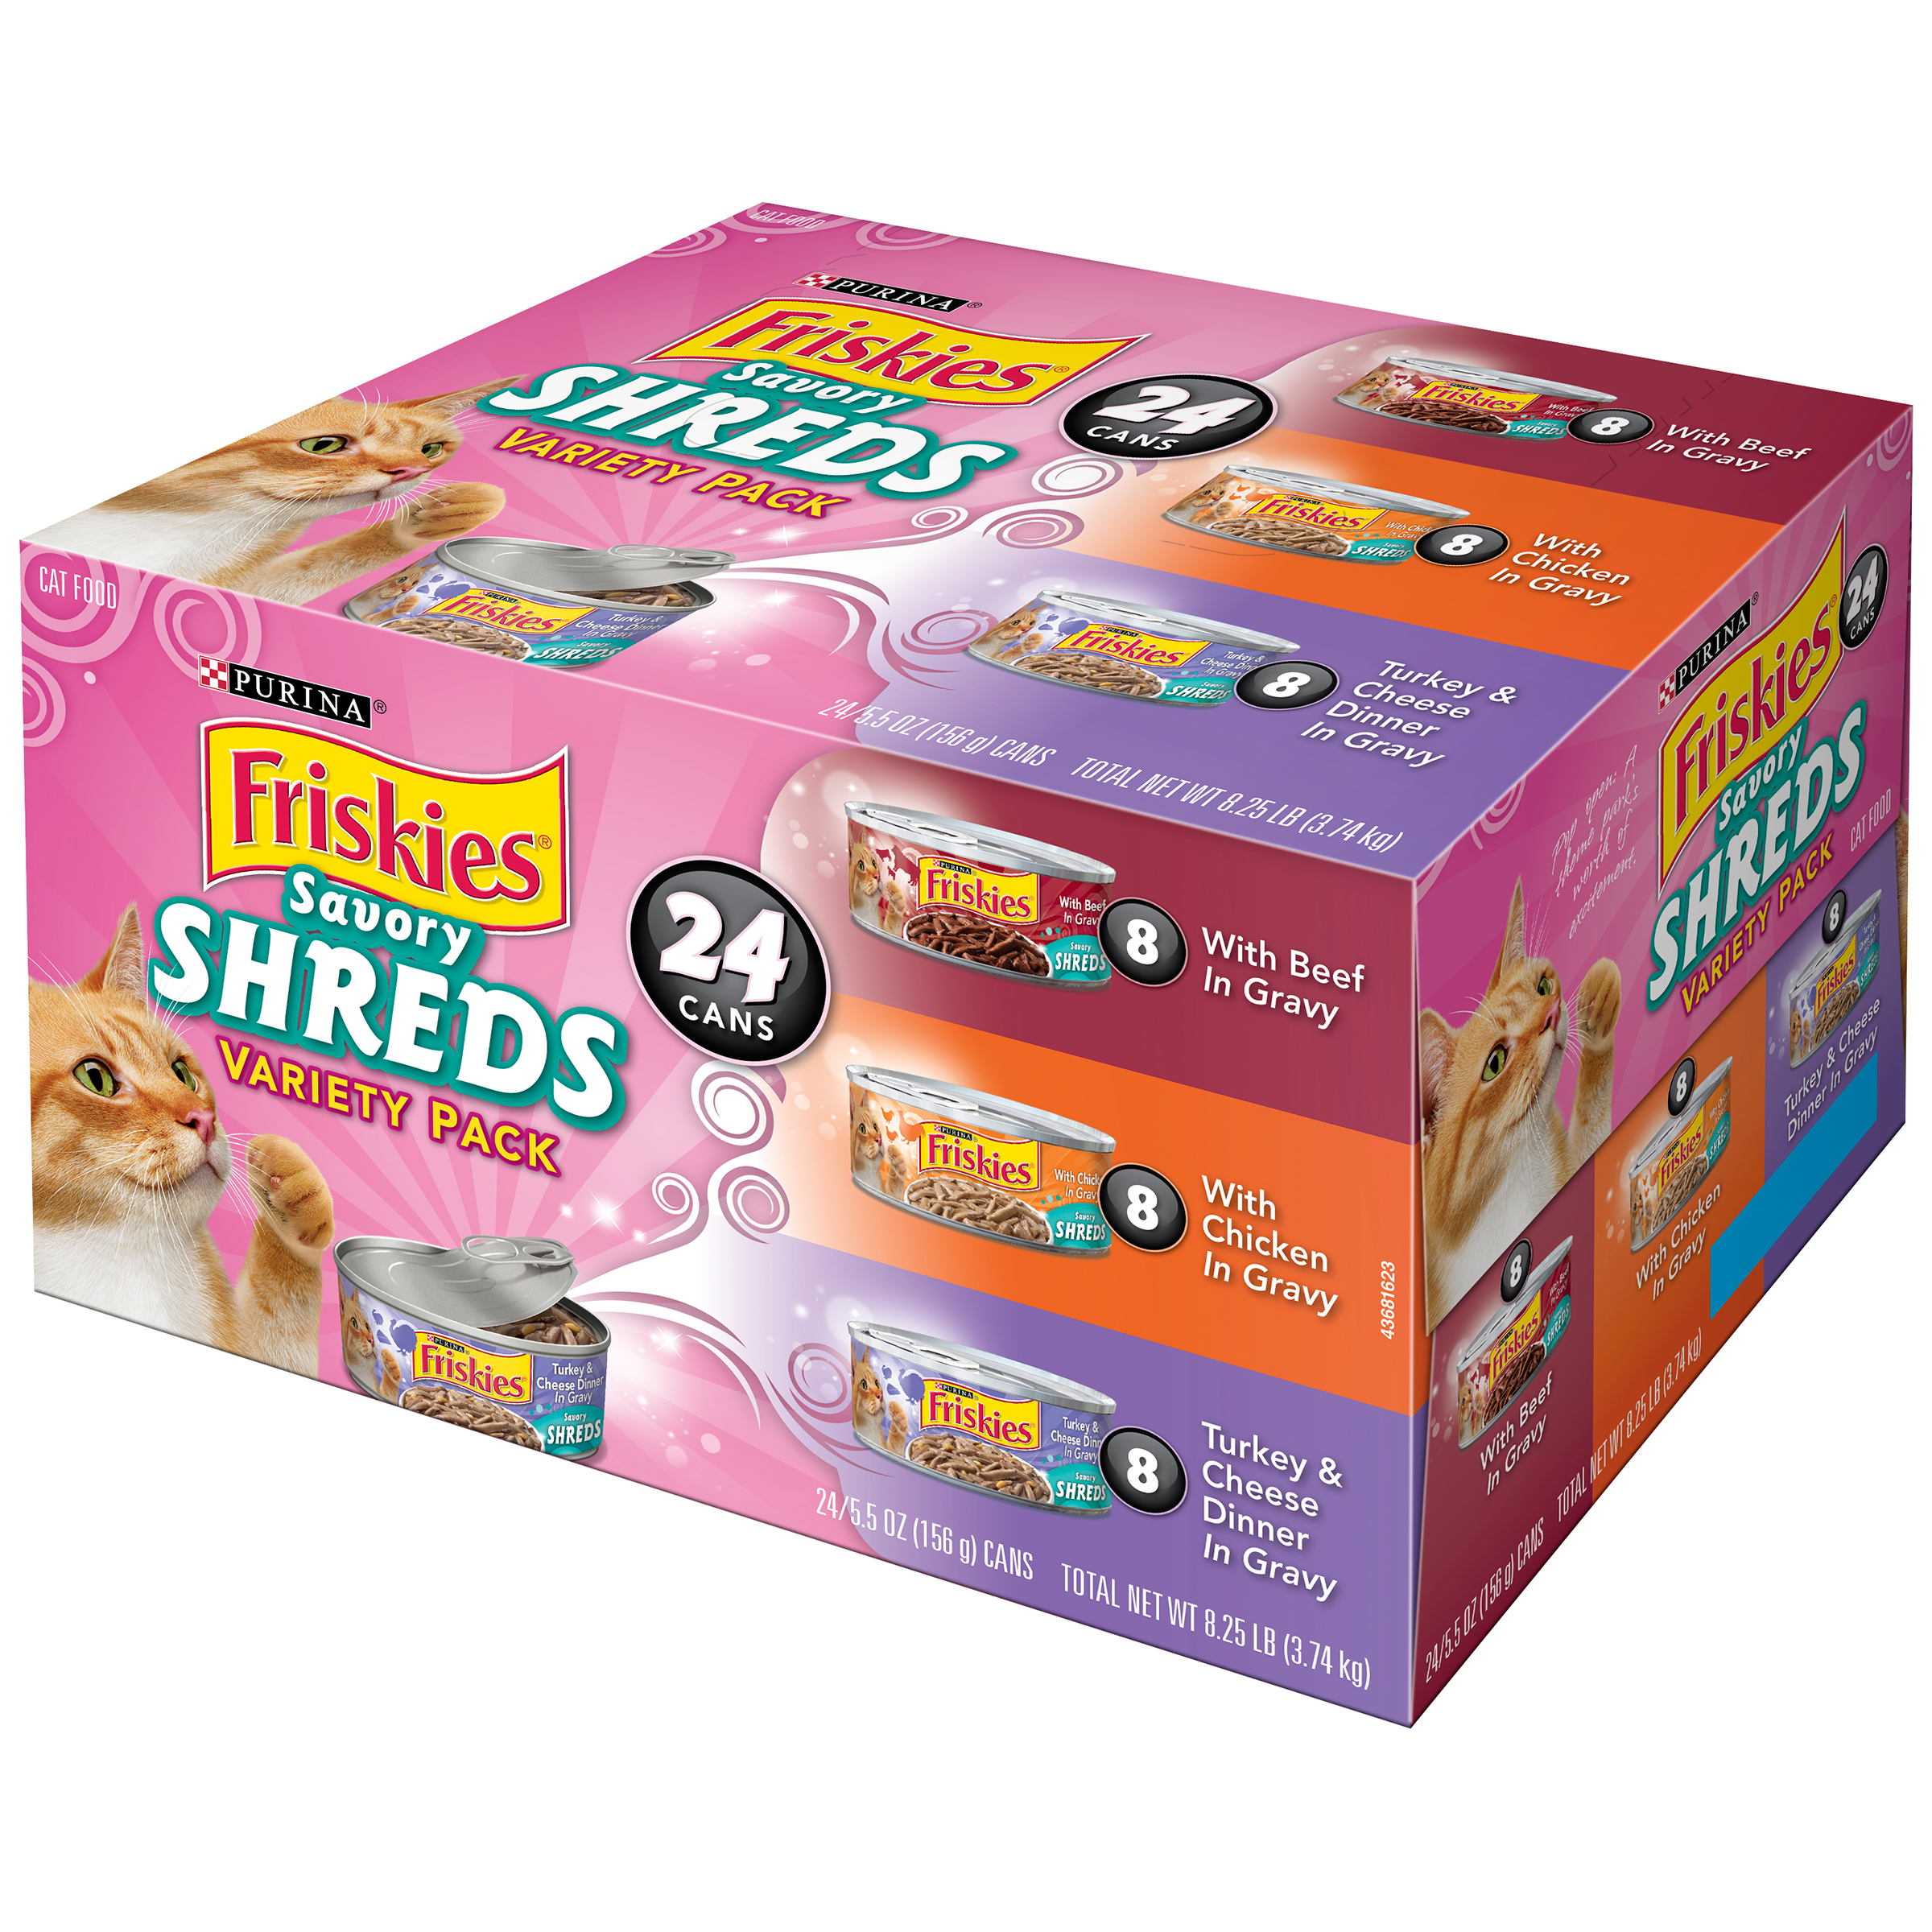 Friskies Savory Shreds Variety Pack Cat Food 24 5.5 oz. Cans   Pet